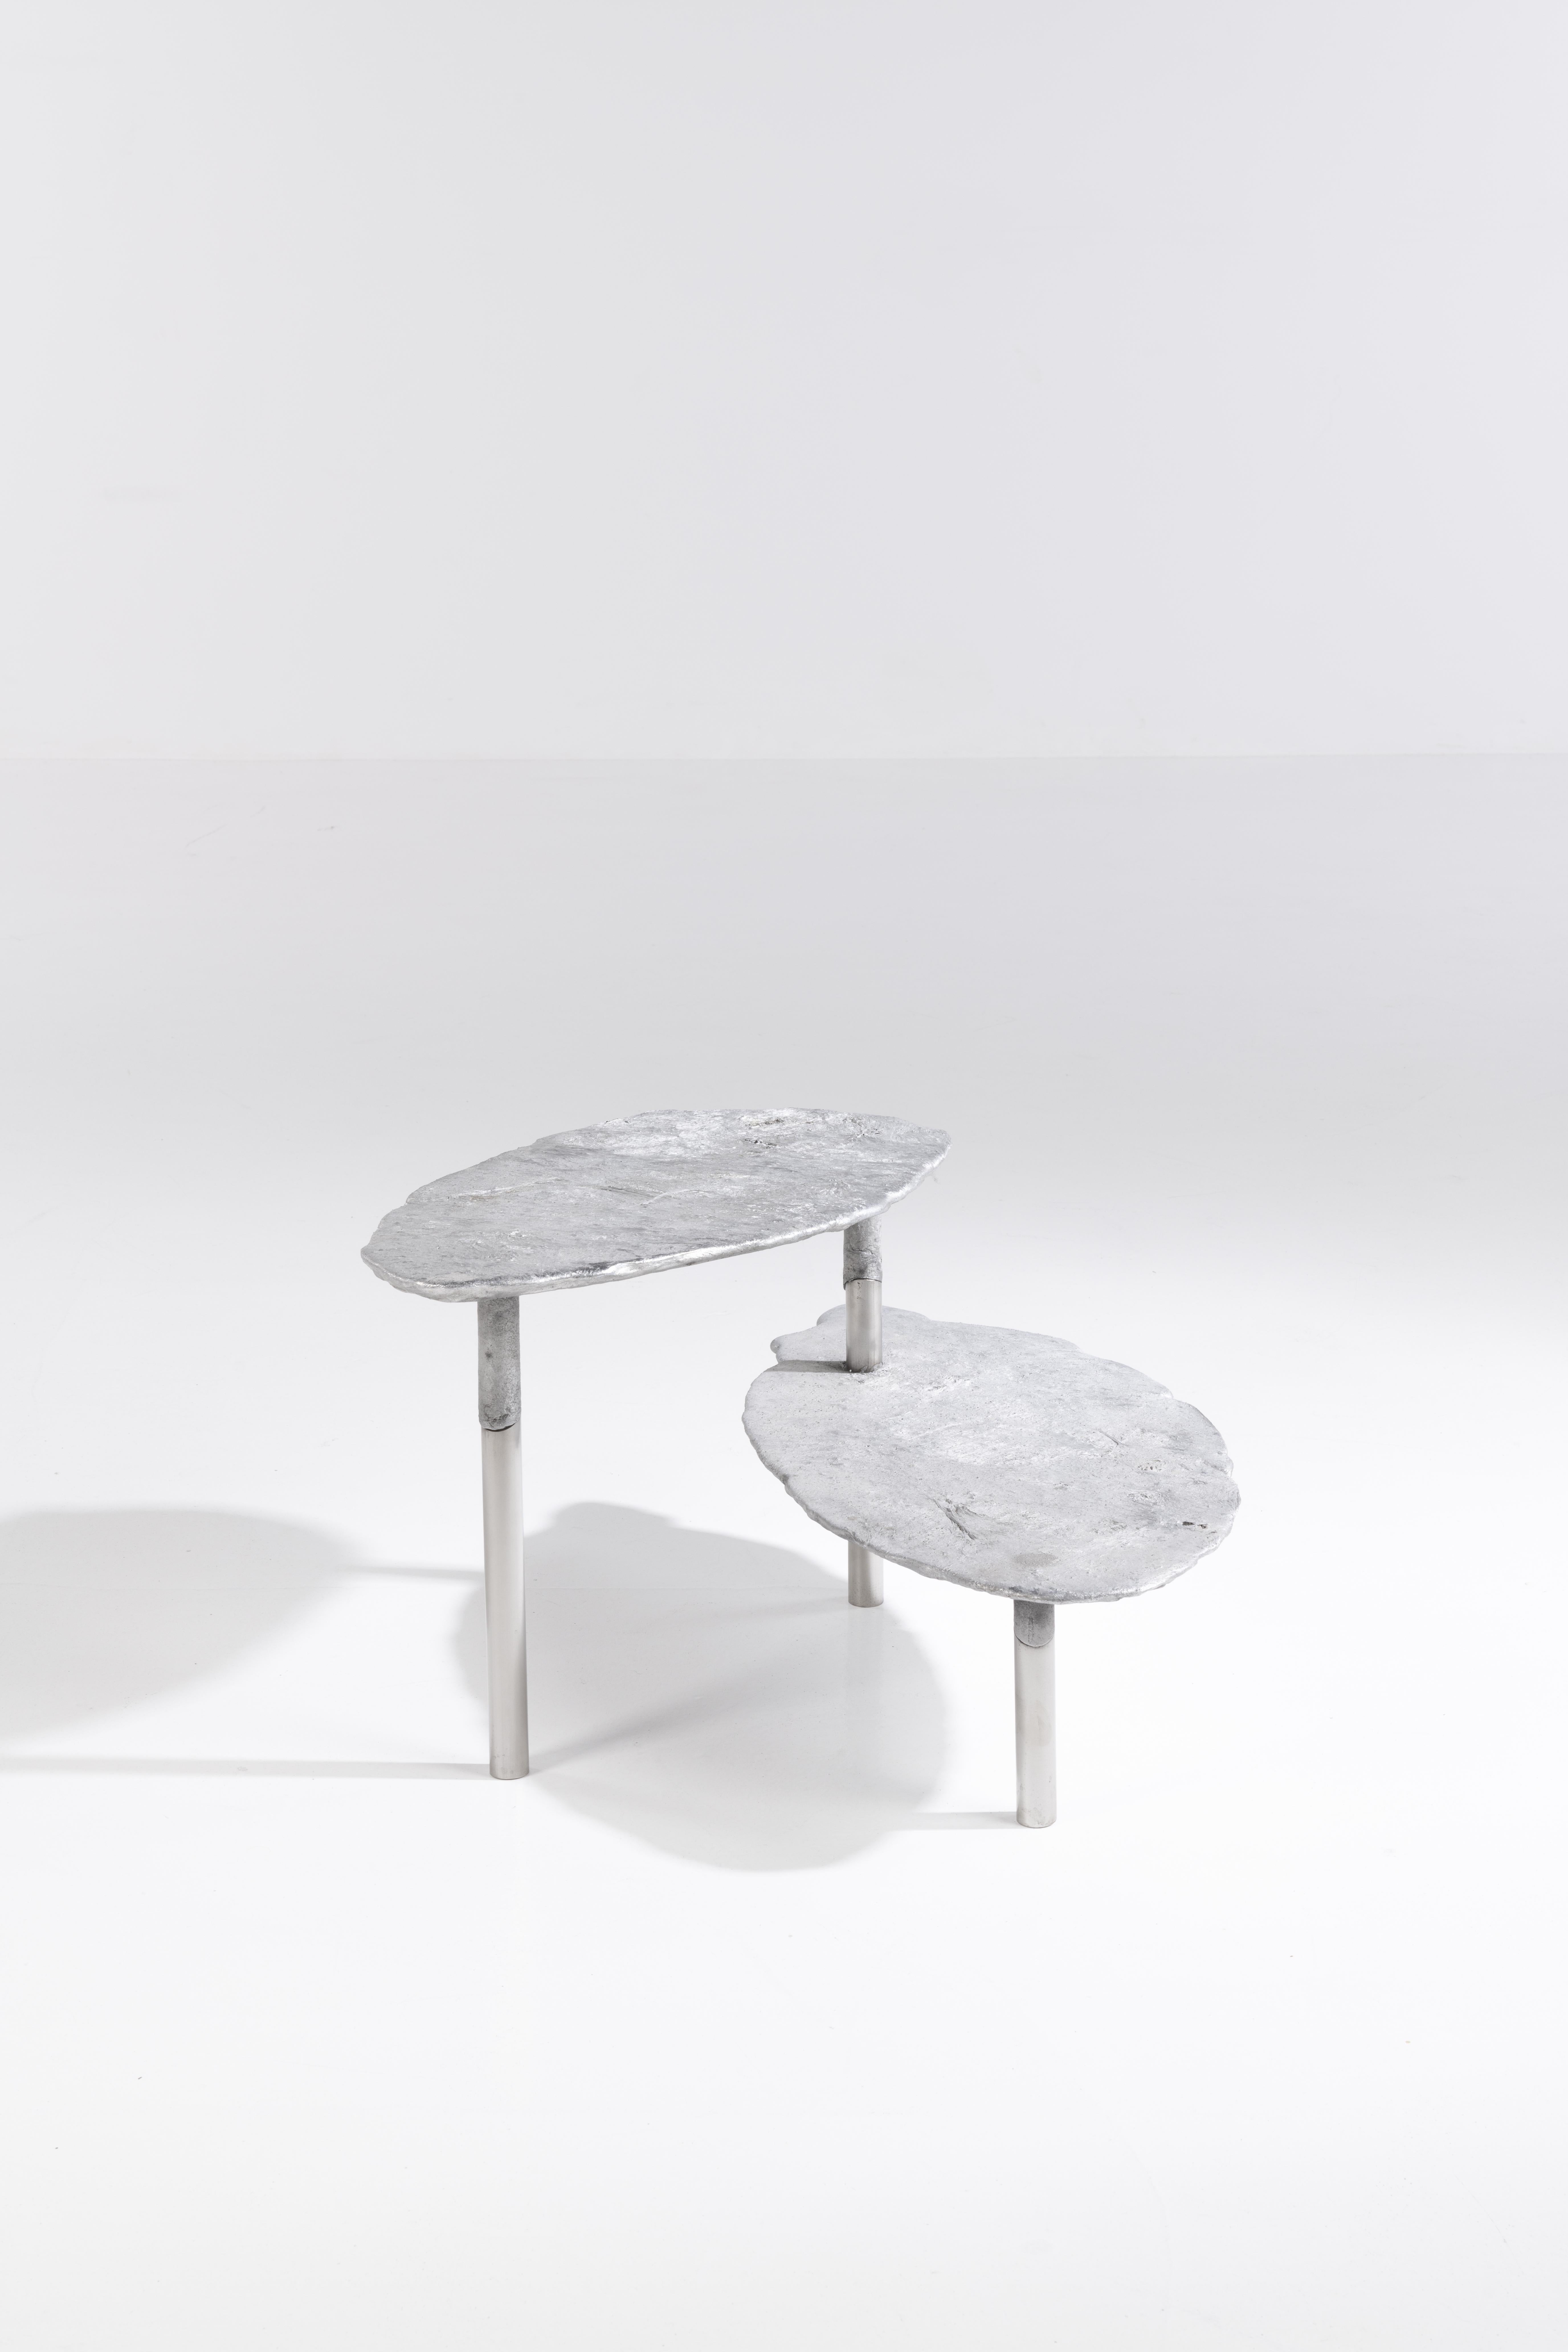 Aluminum concretion coffee table by Studio Julien Manaira
Dimensions: 65 x 65 x 40 cm
Materials: Aluminium and stainless steel

The concretion project consists of sand-casting aluminium in a base of stainless steel tubes to form objects. The